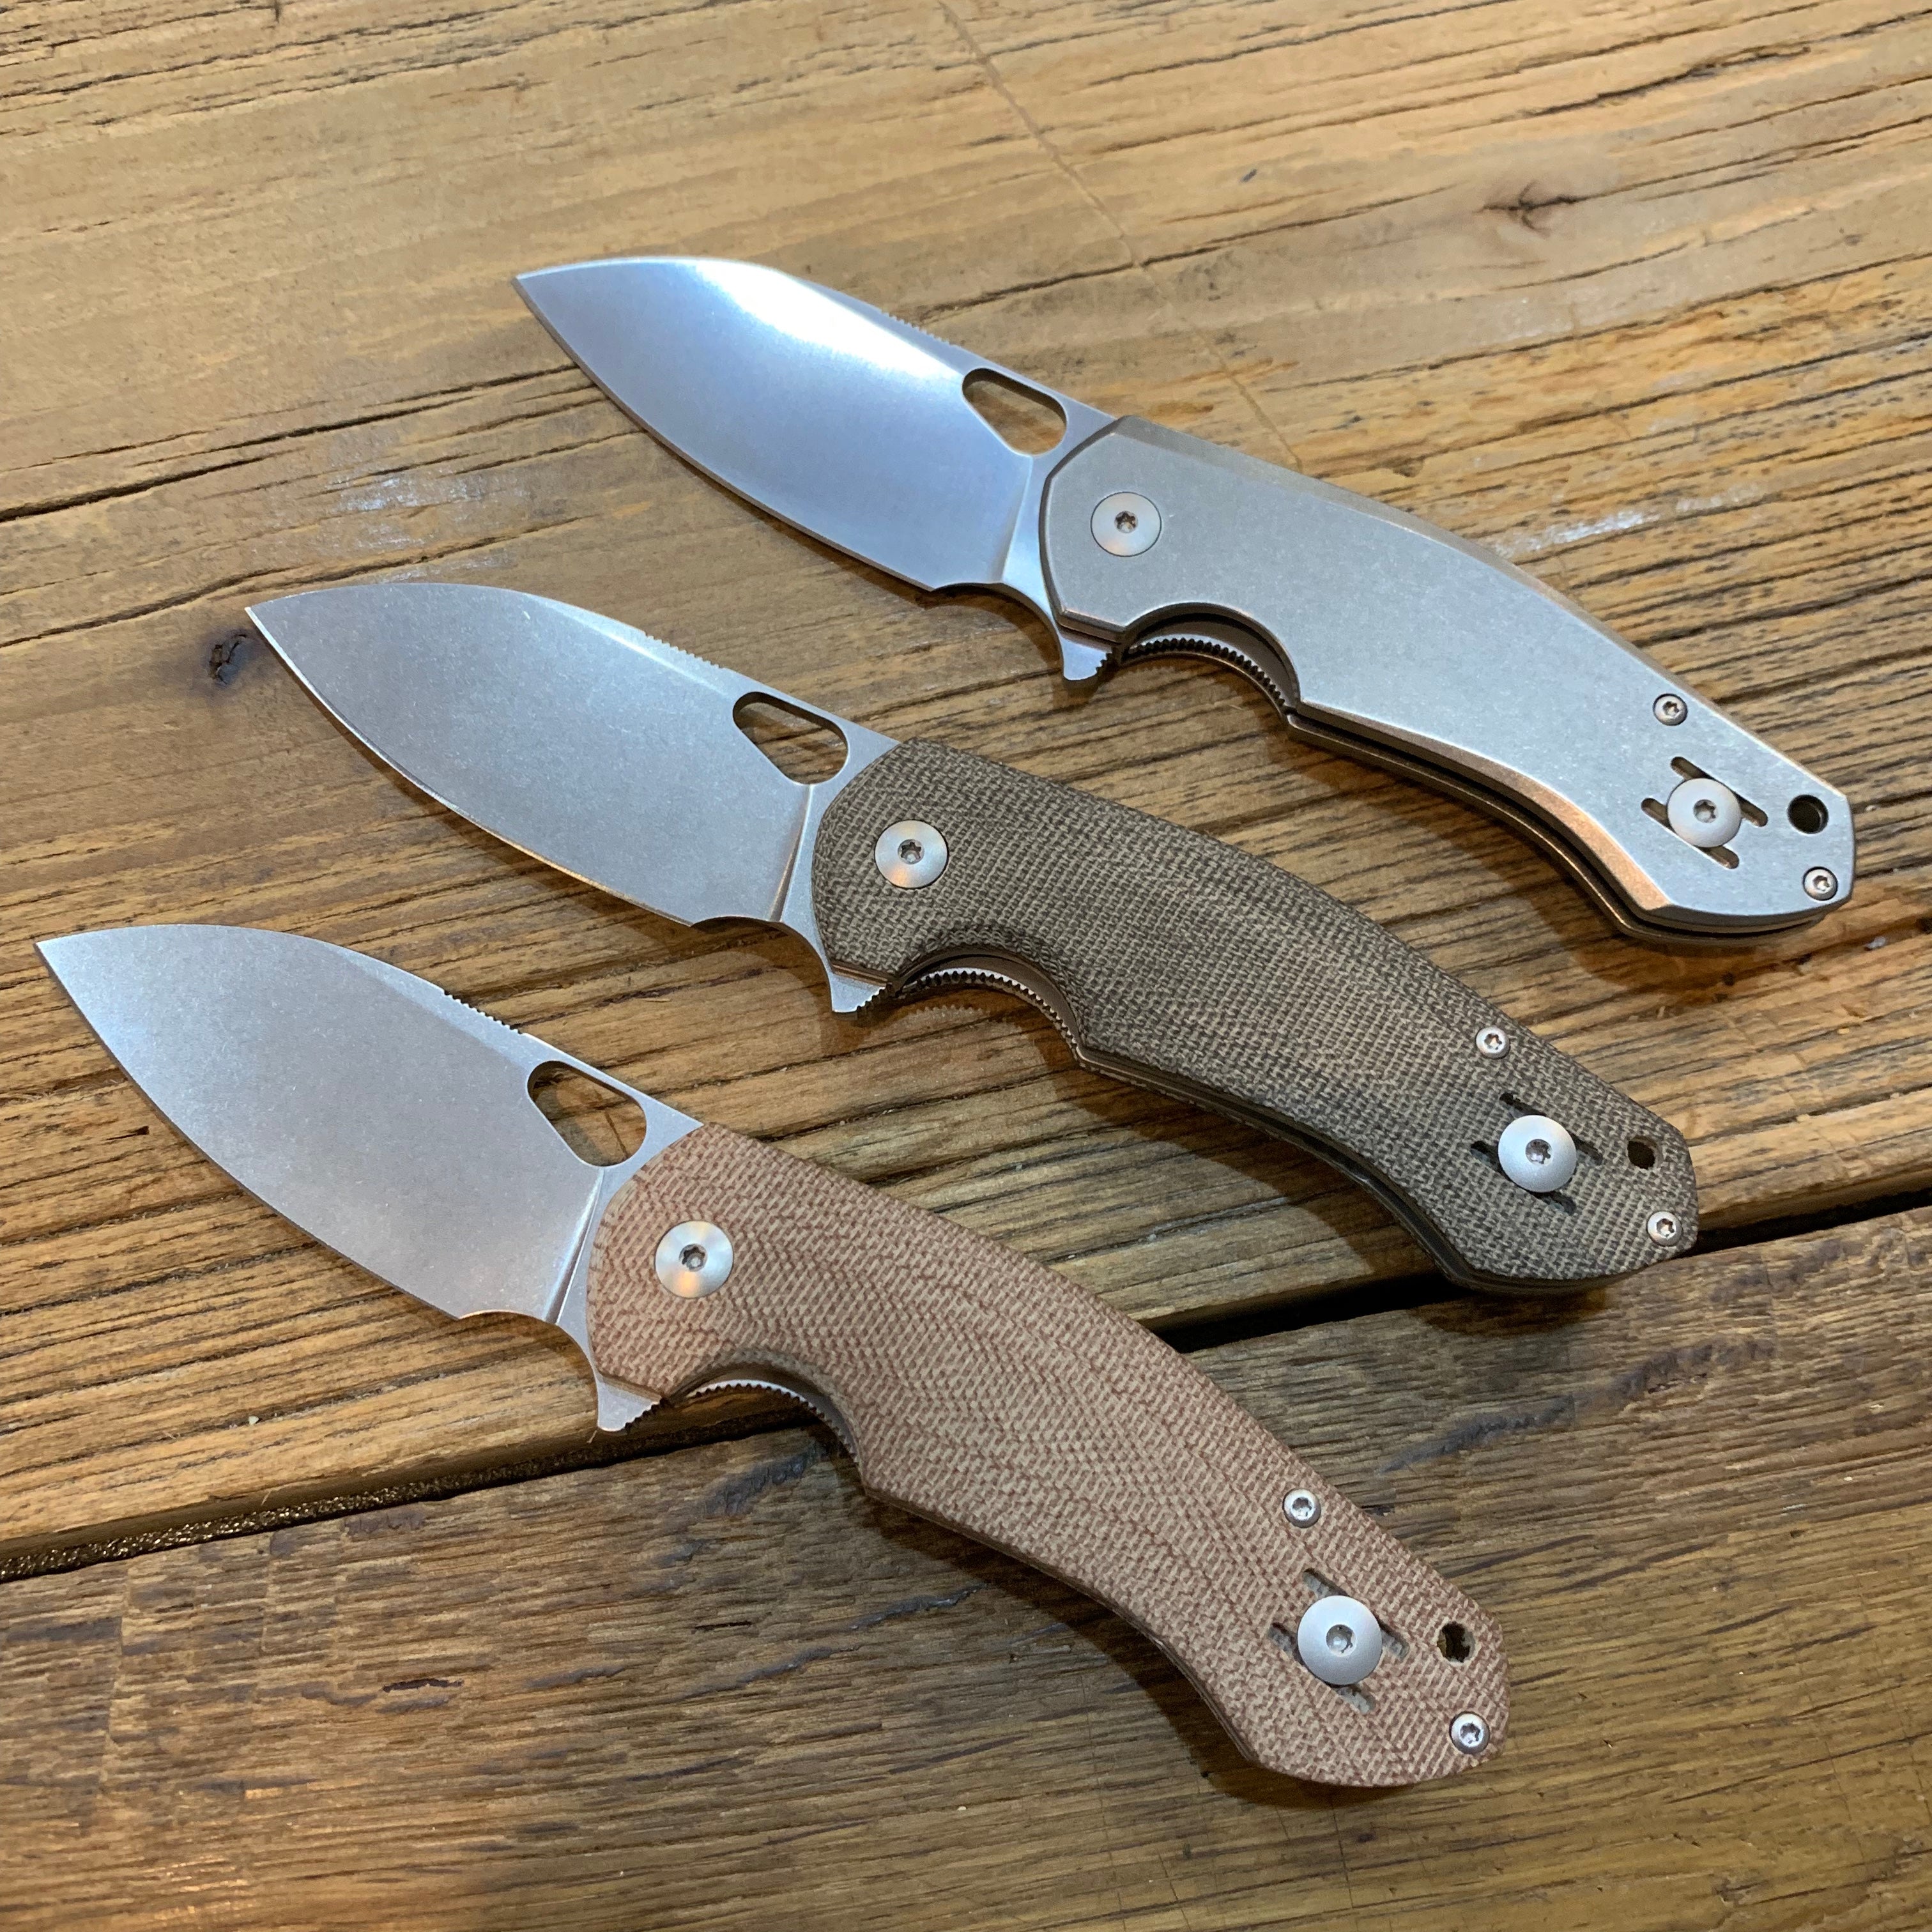 The GiantMouse Knives ACE Biblio is an Absolutely Amazing Knife for the Money